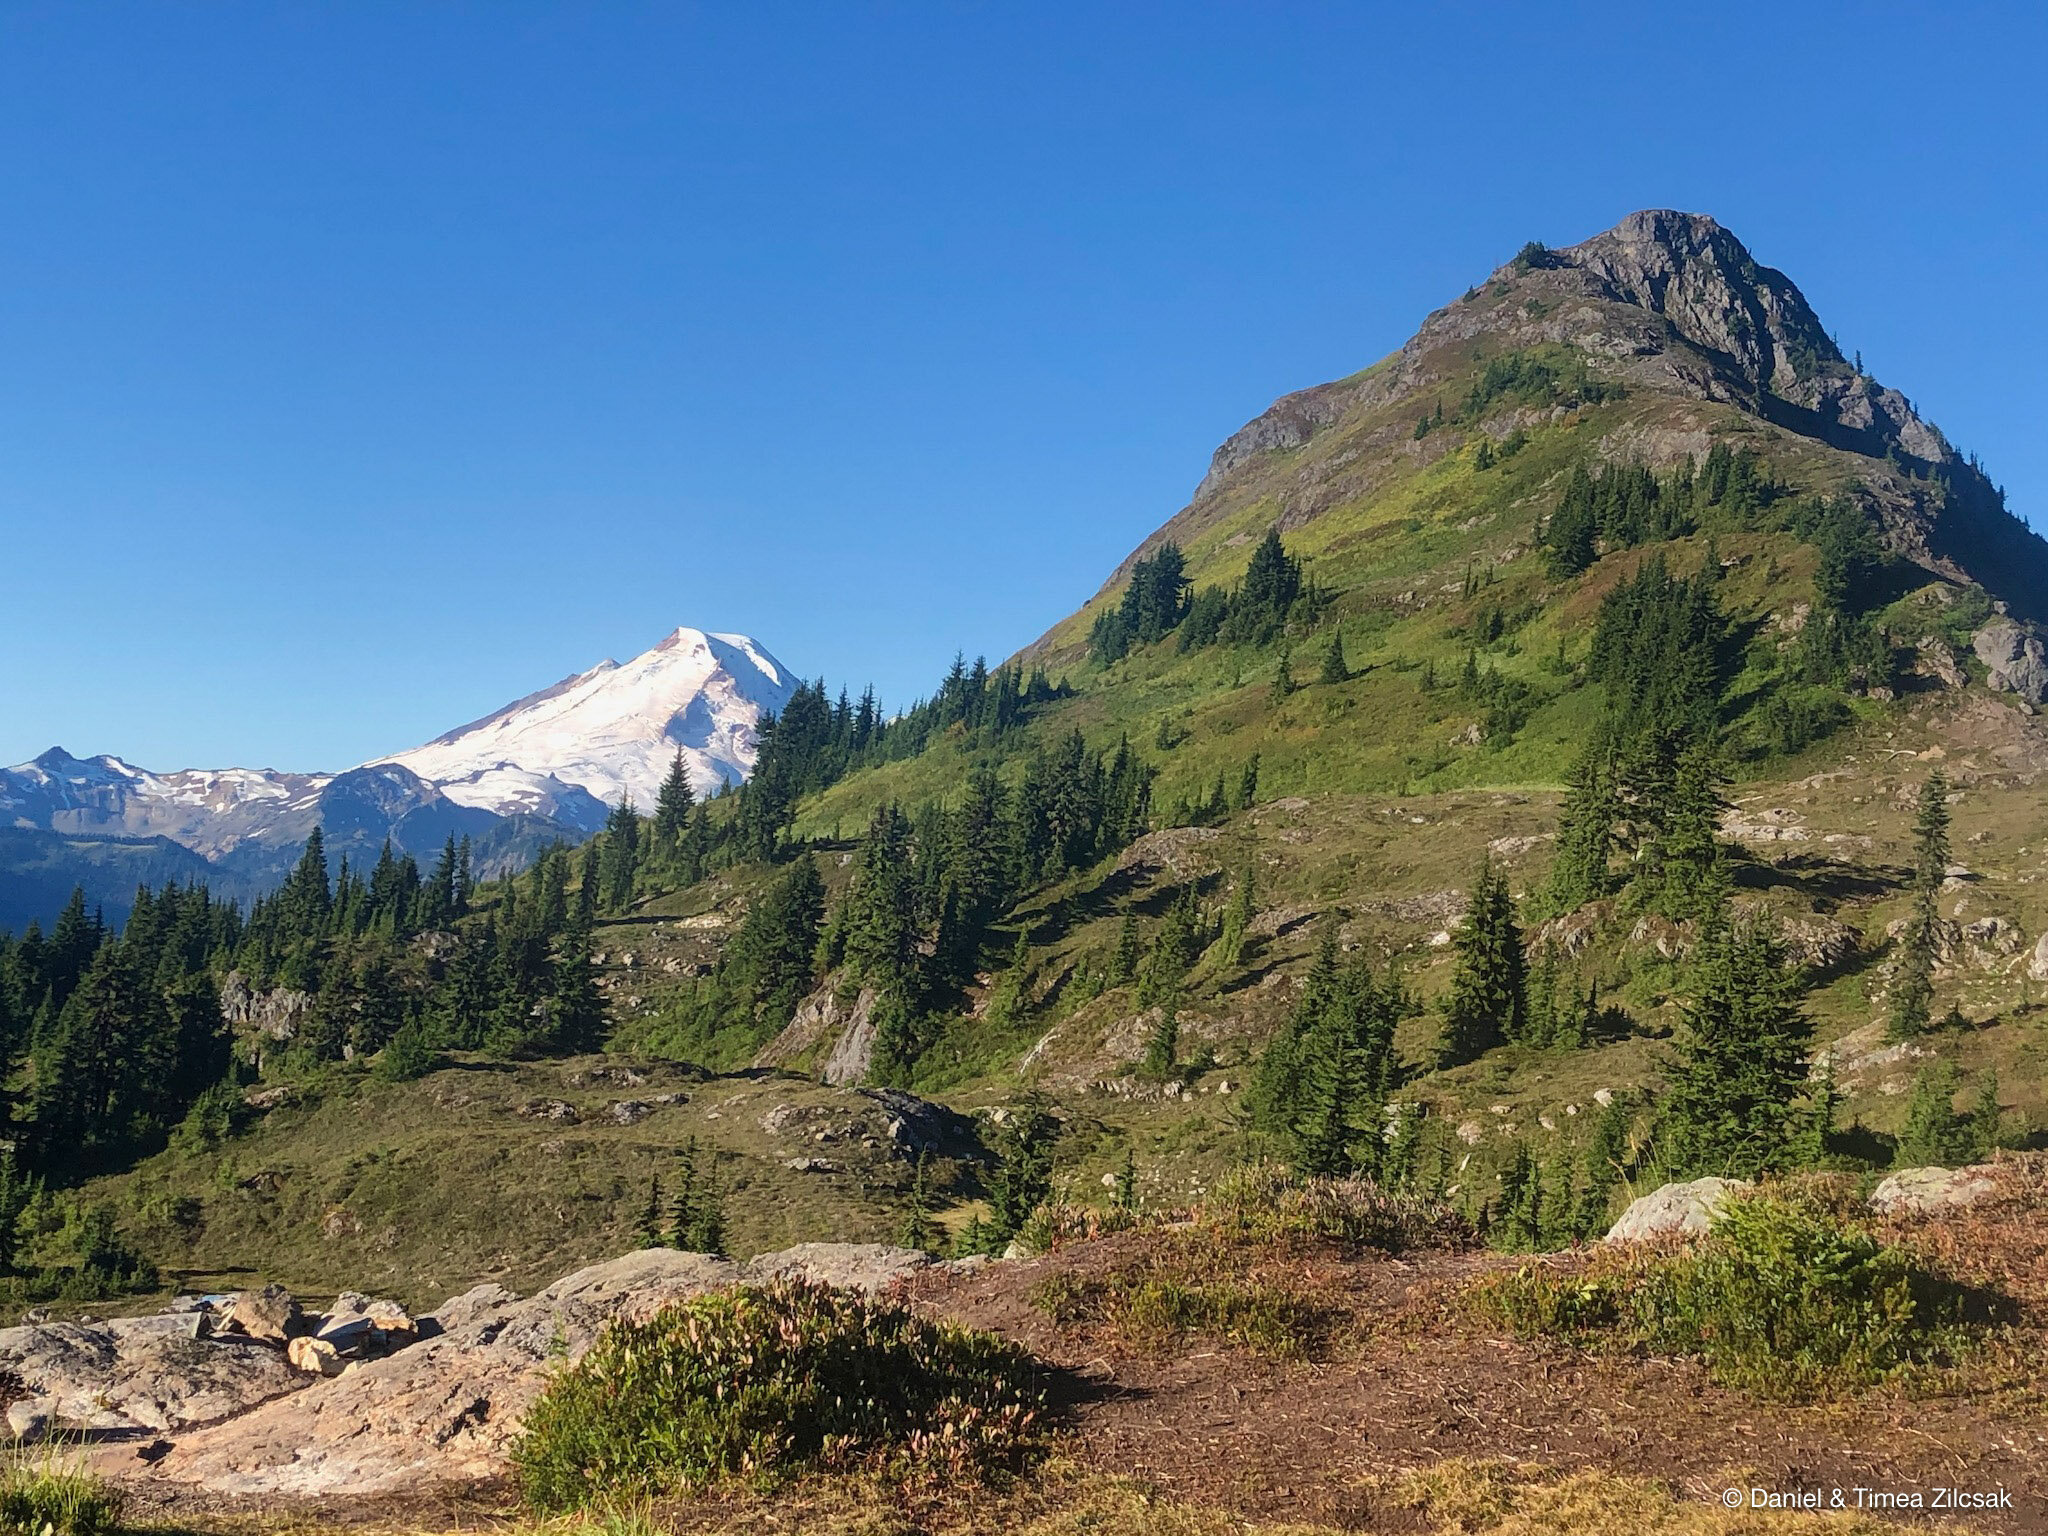 View of Mount Baker from our camp